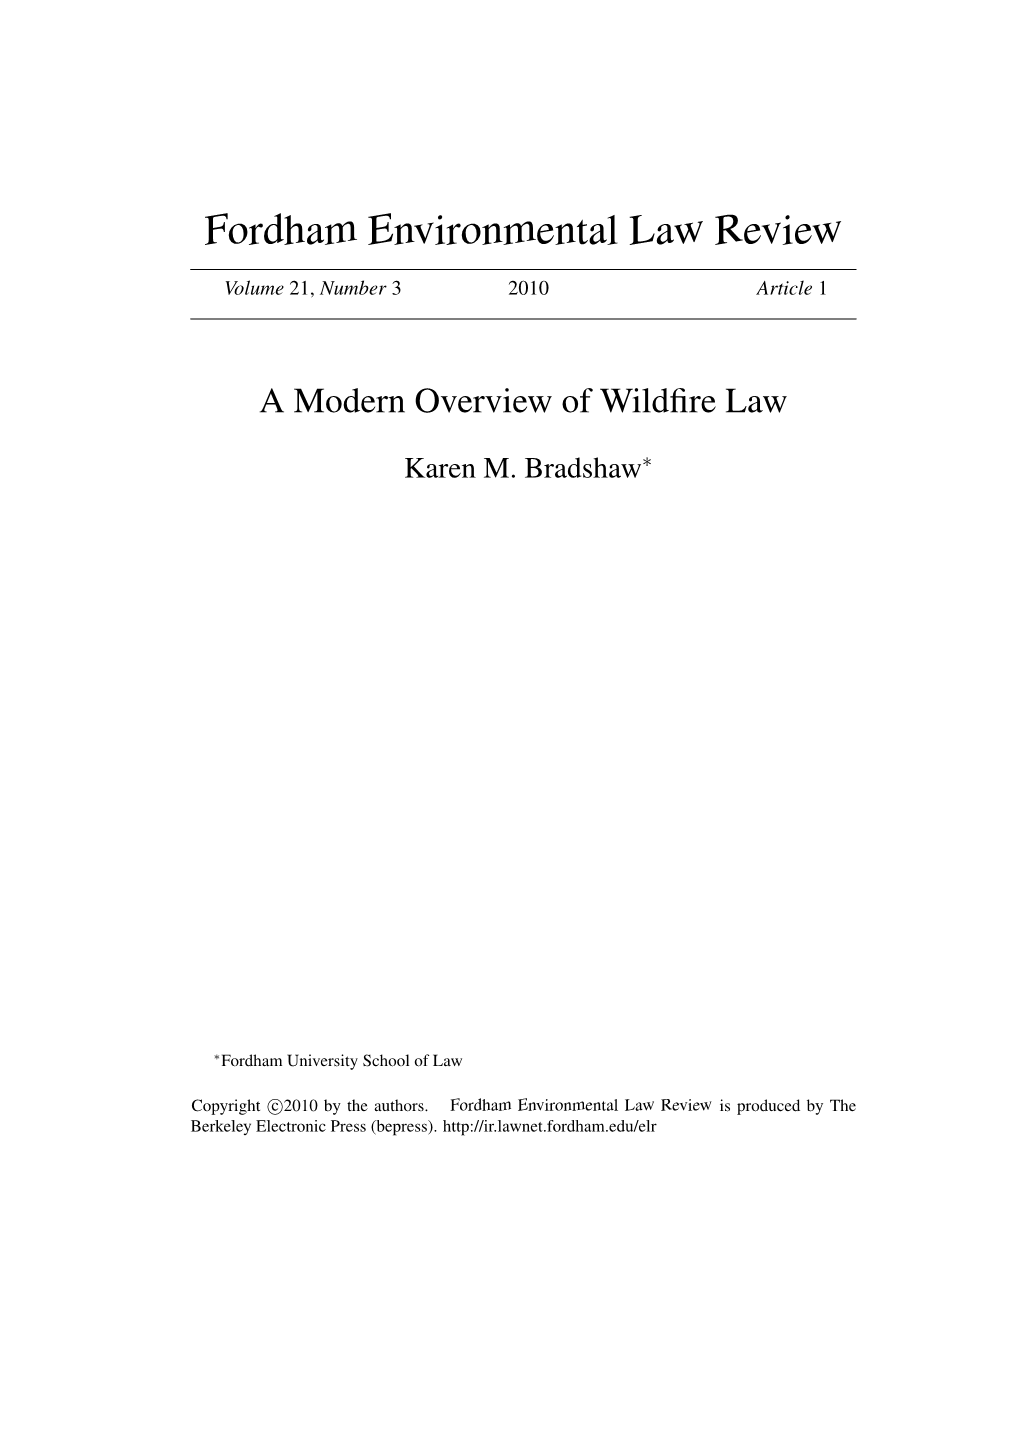 A Modern Overview of Wildfire Law